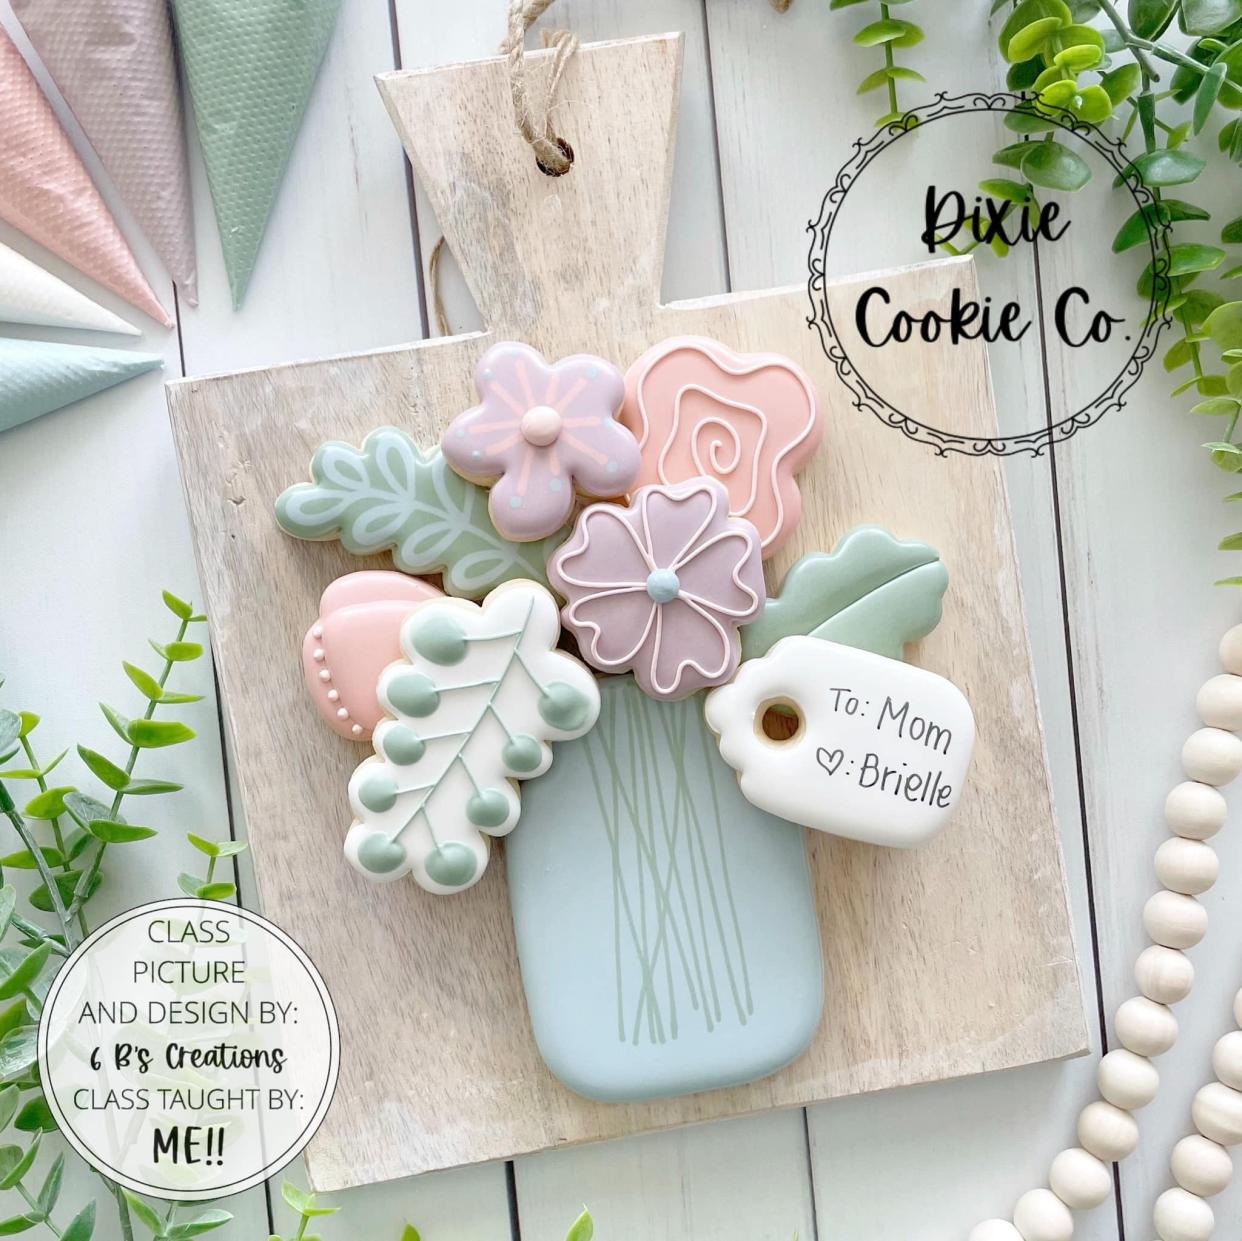 From noon to 2 p.m. April 27, Bethany Bruni is hosting a floral-themed Mother’s Day cookie decorating class at Little Brown Jug in Maybee.